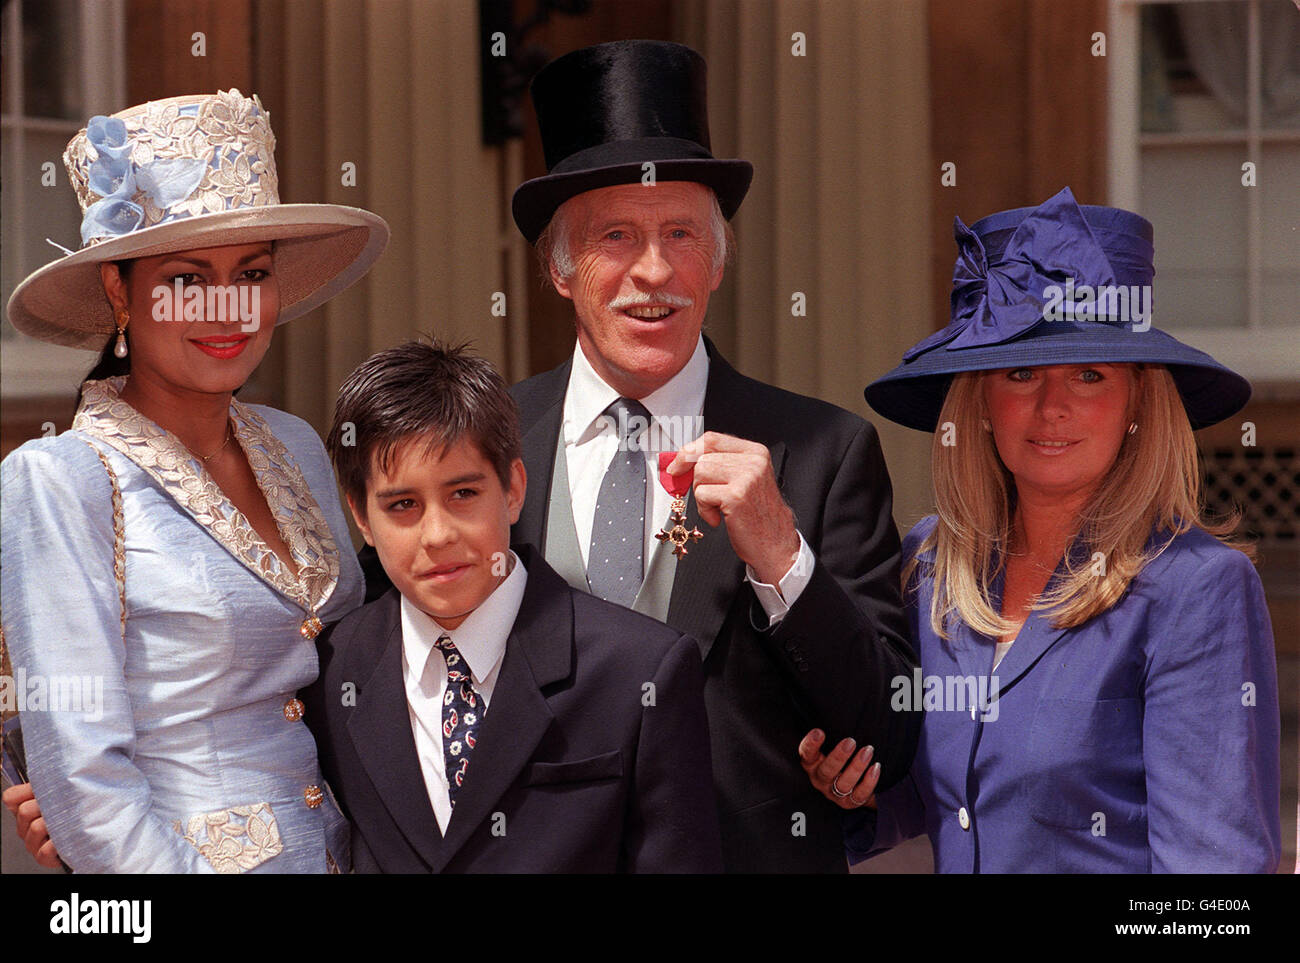 PA NEWS 22/7/98 ENTERTAINER BRUCE FORSYTH, WITH WIFE WILNELIA (LEFT) AND THEIR SON JJ, AND HIS DAUGHTER DEBBIE FROM HIS PREVIOUS MARRIAGE TO ANTHEA REDFERN, PROUDLY DISPLAYING HIS OBE WHICH HE RECEIVED FROM THE QUEEN DURING THE INVESTITURE CEREMONY AT BUCKINGHAM PALACE IN LONDON. Stock Photo